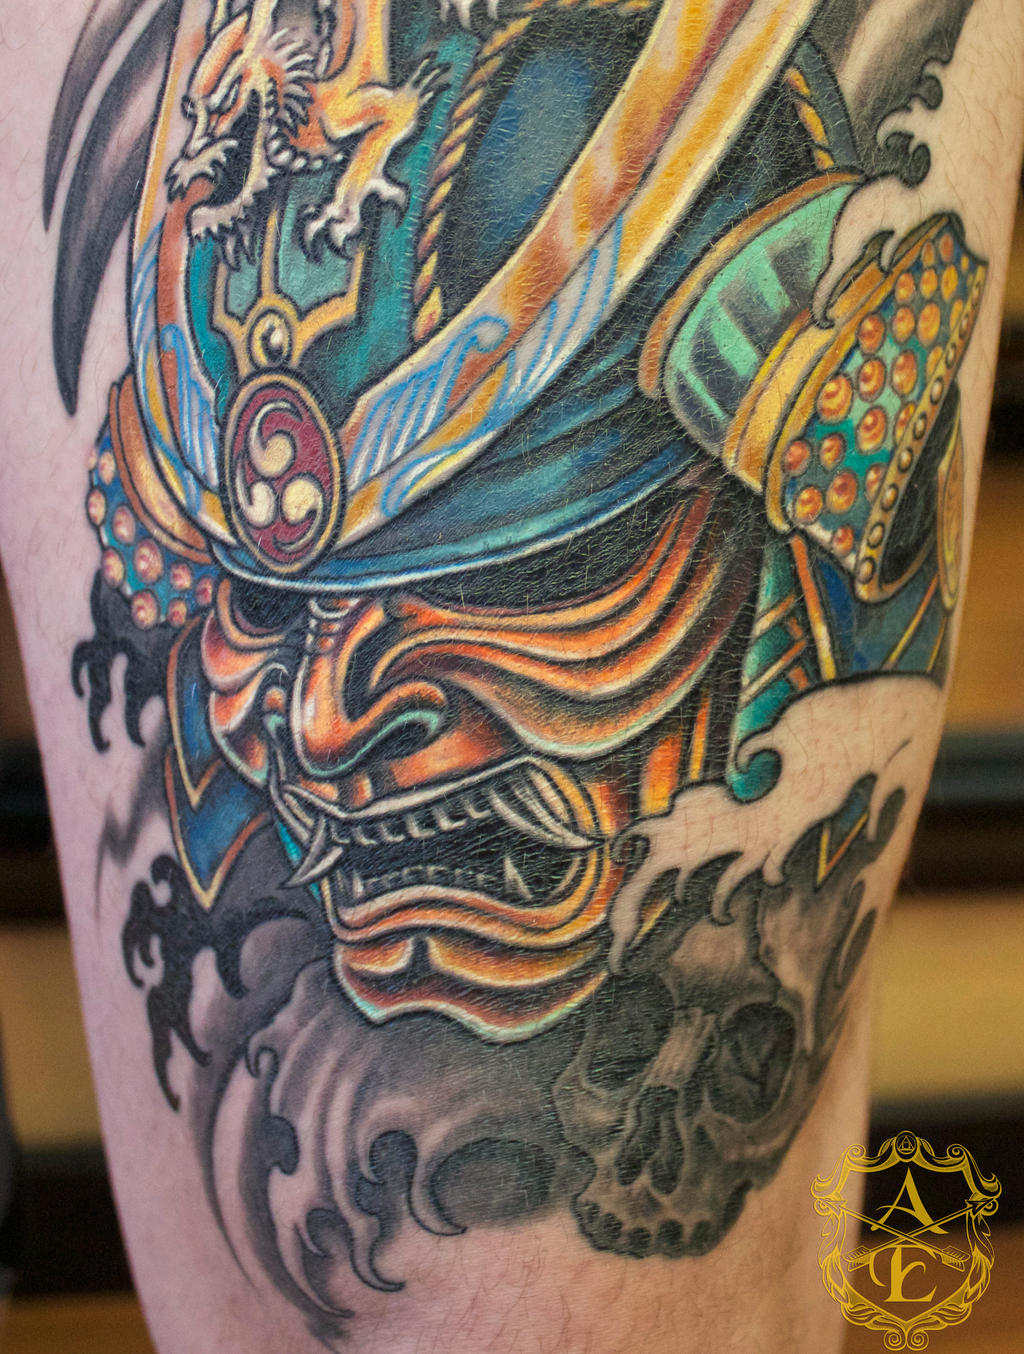 Samurai Mask Tattoo done by Sean Ambrose by seanspoison on DeviantArt